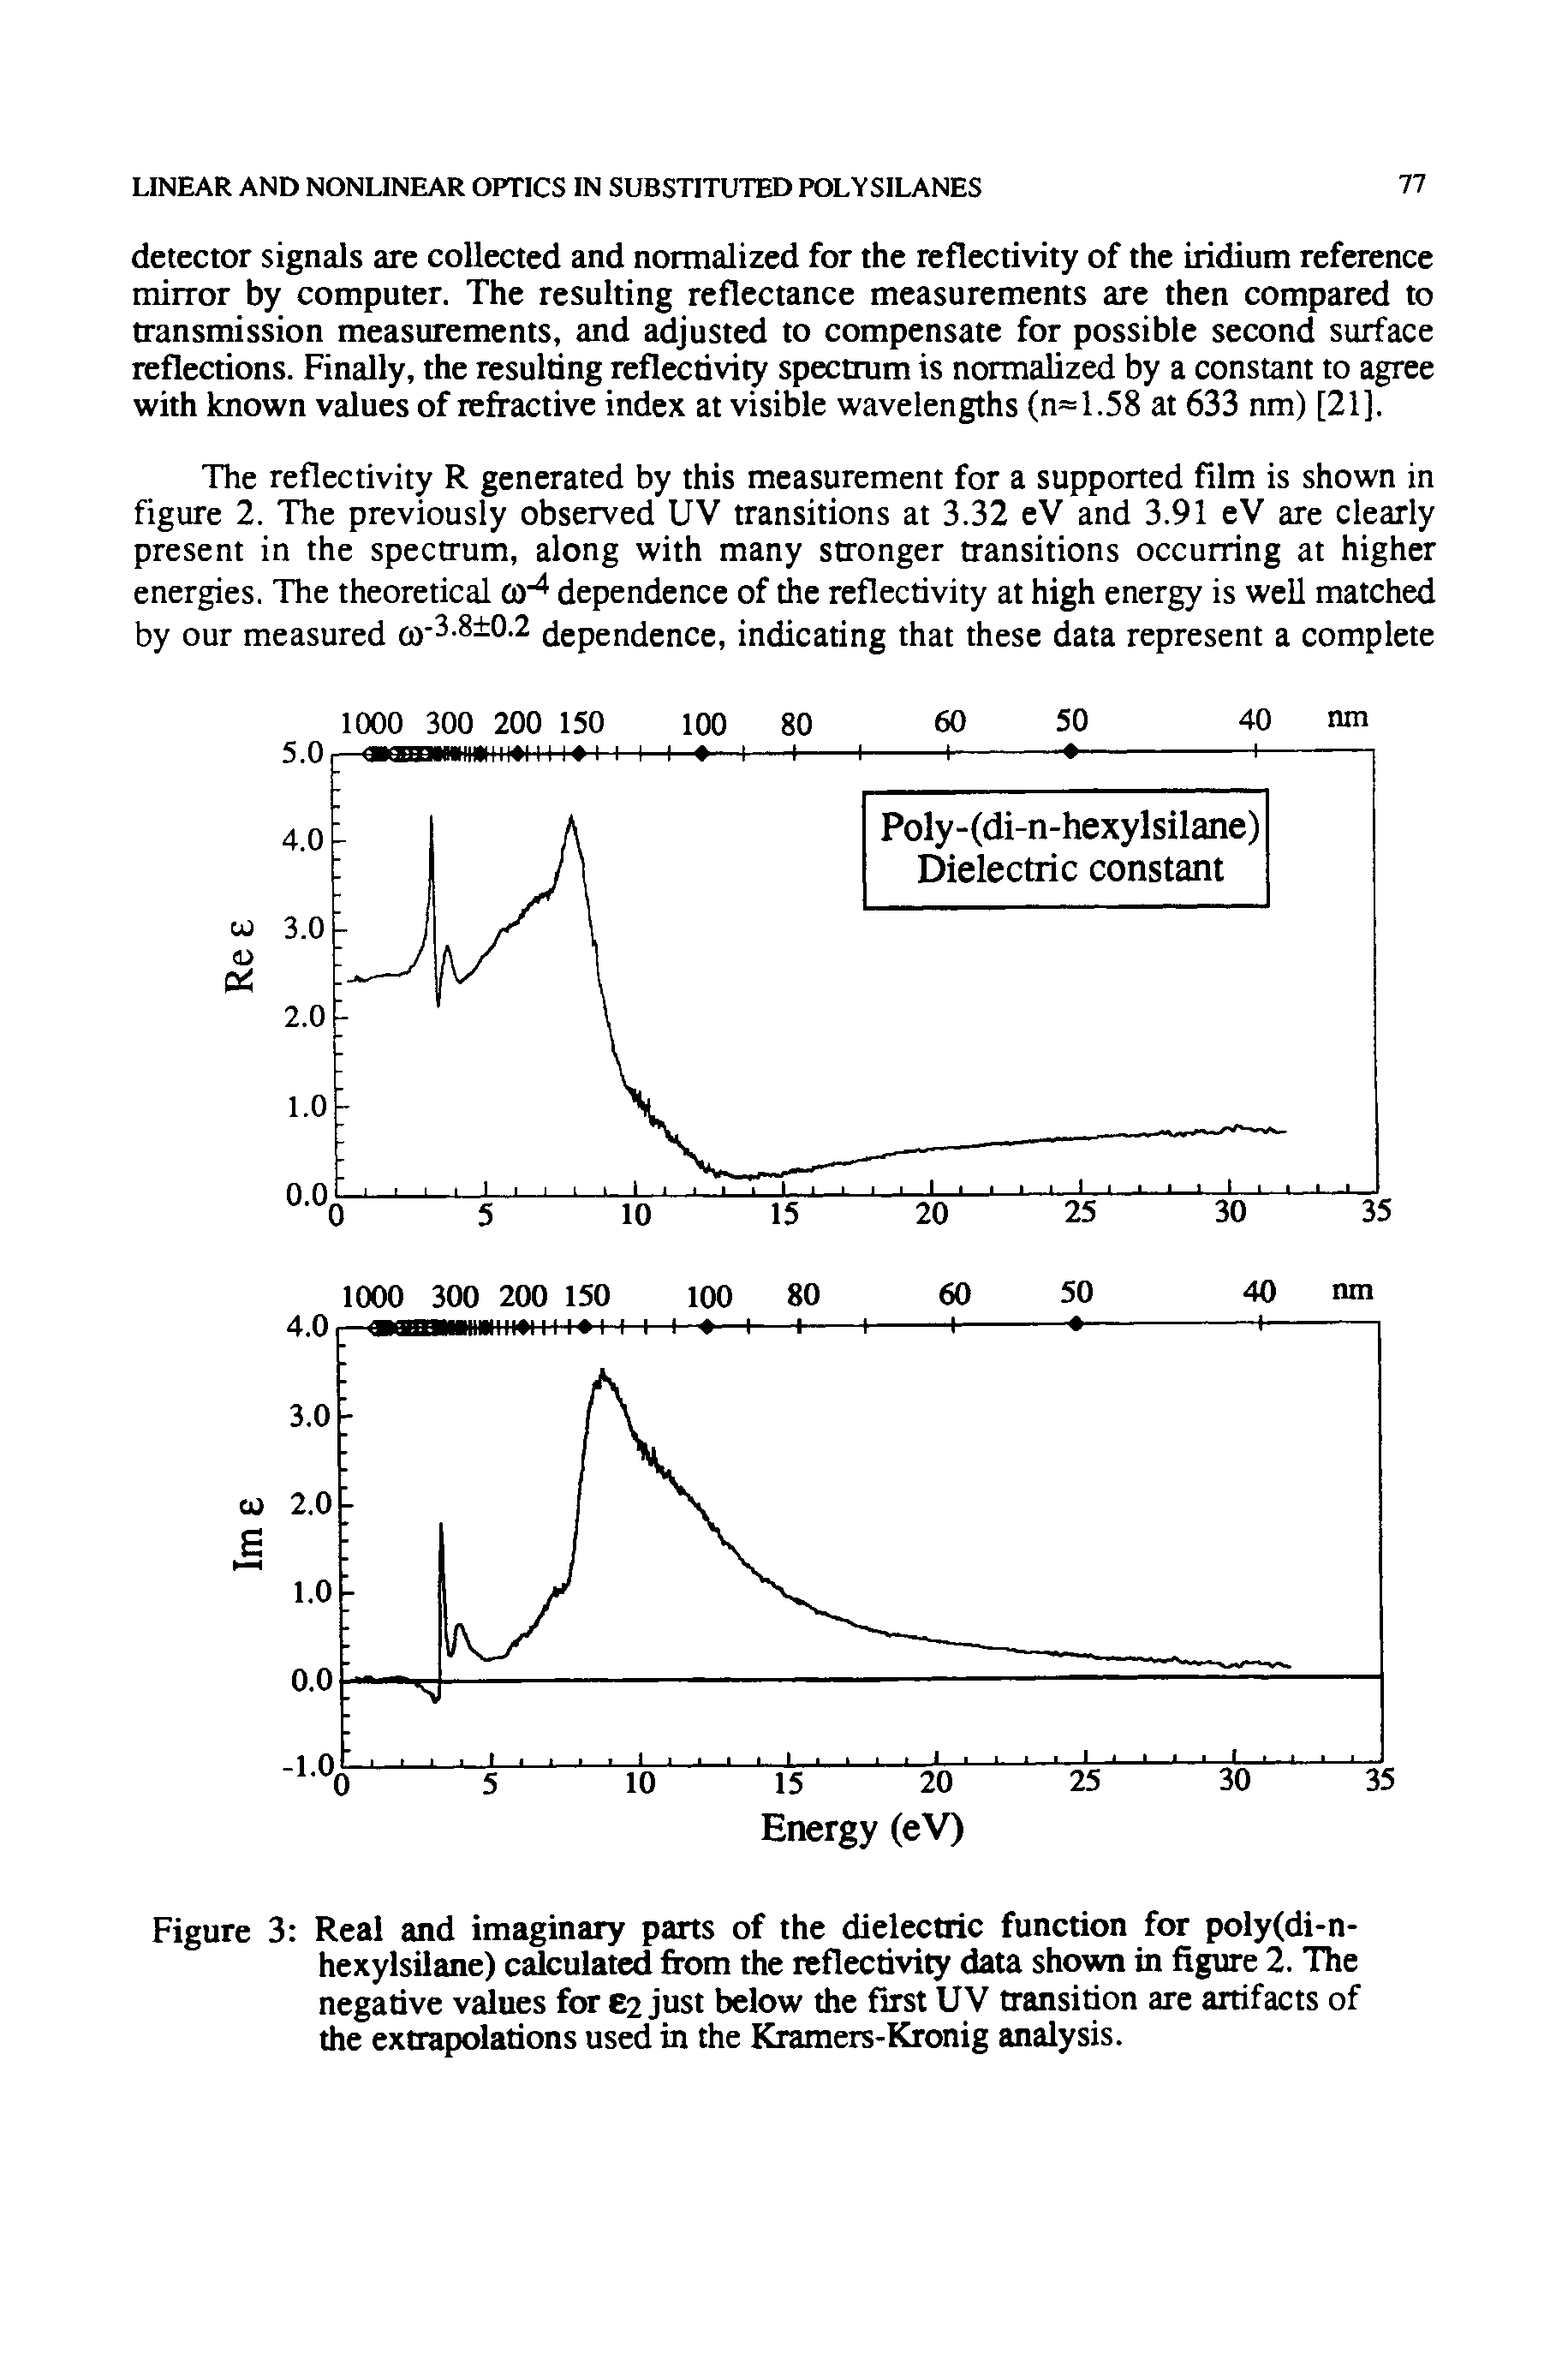 Figure 3 Real and imaginary parts of the dielectric function for poly(di-n-hexylsilane) calculated from the reflectivity data shown in figure 2. The negative values for 62 just below the first UV transition are artifacts of the extrapolations used in the Kramers-Kronig analysis.